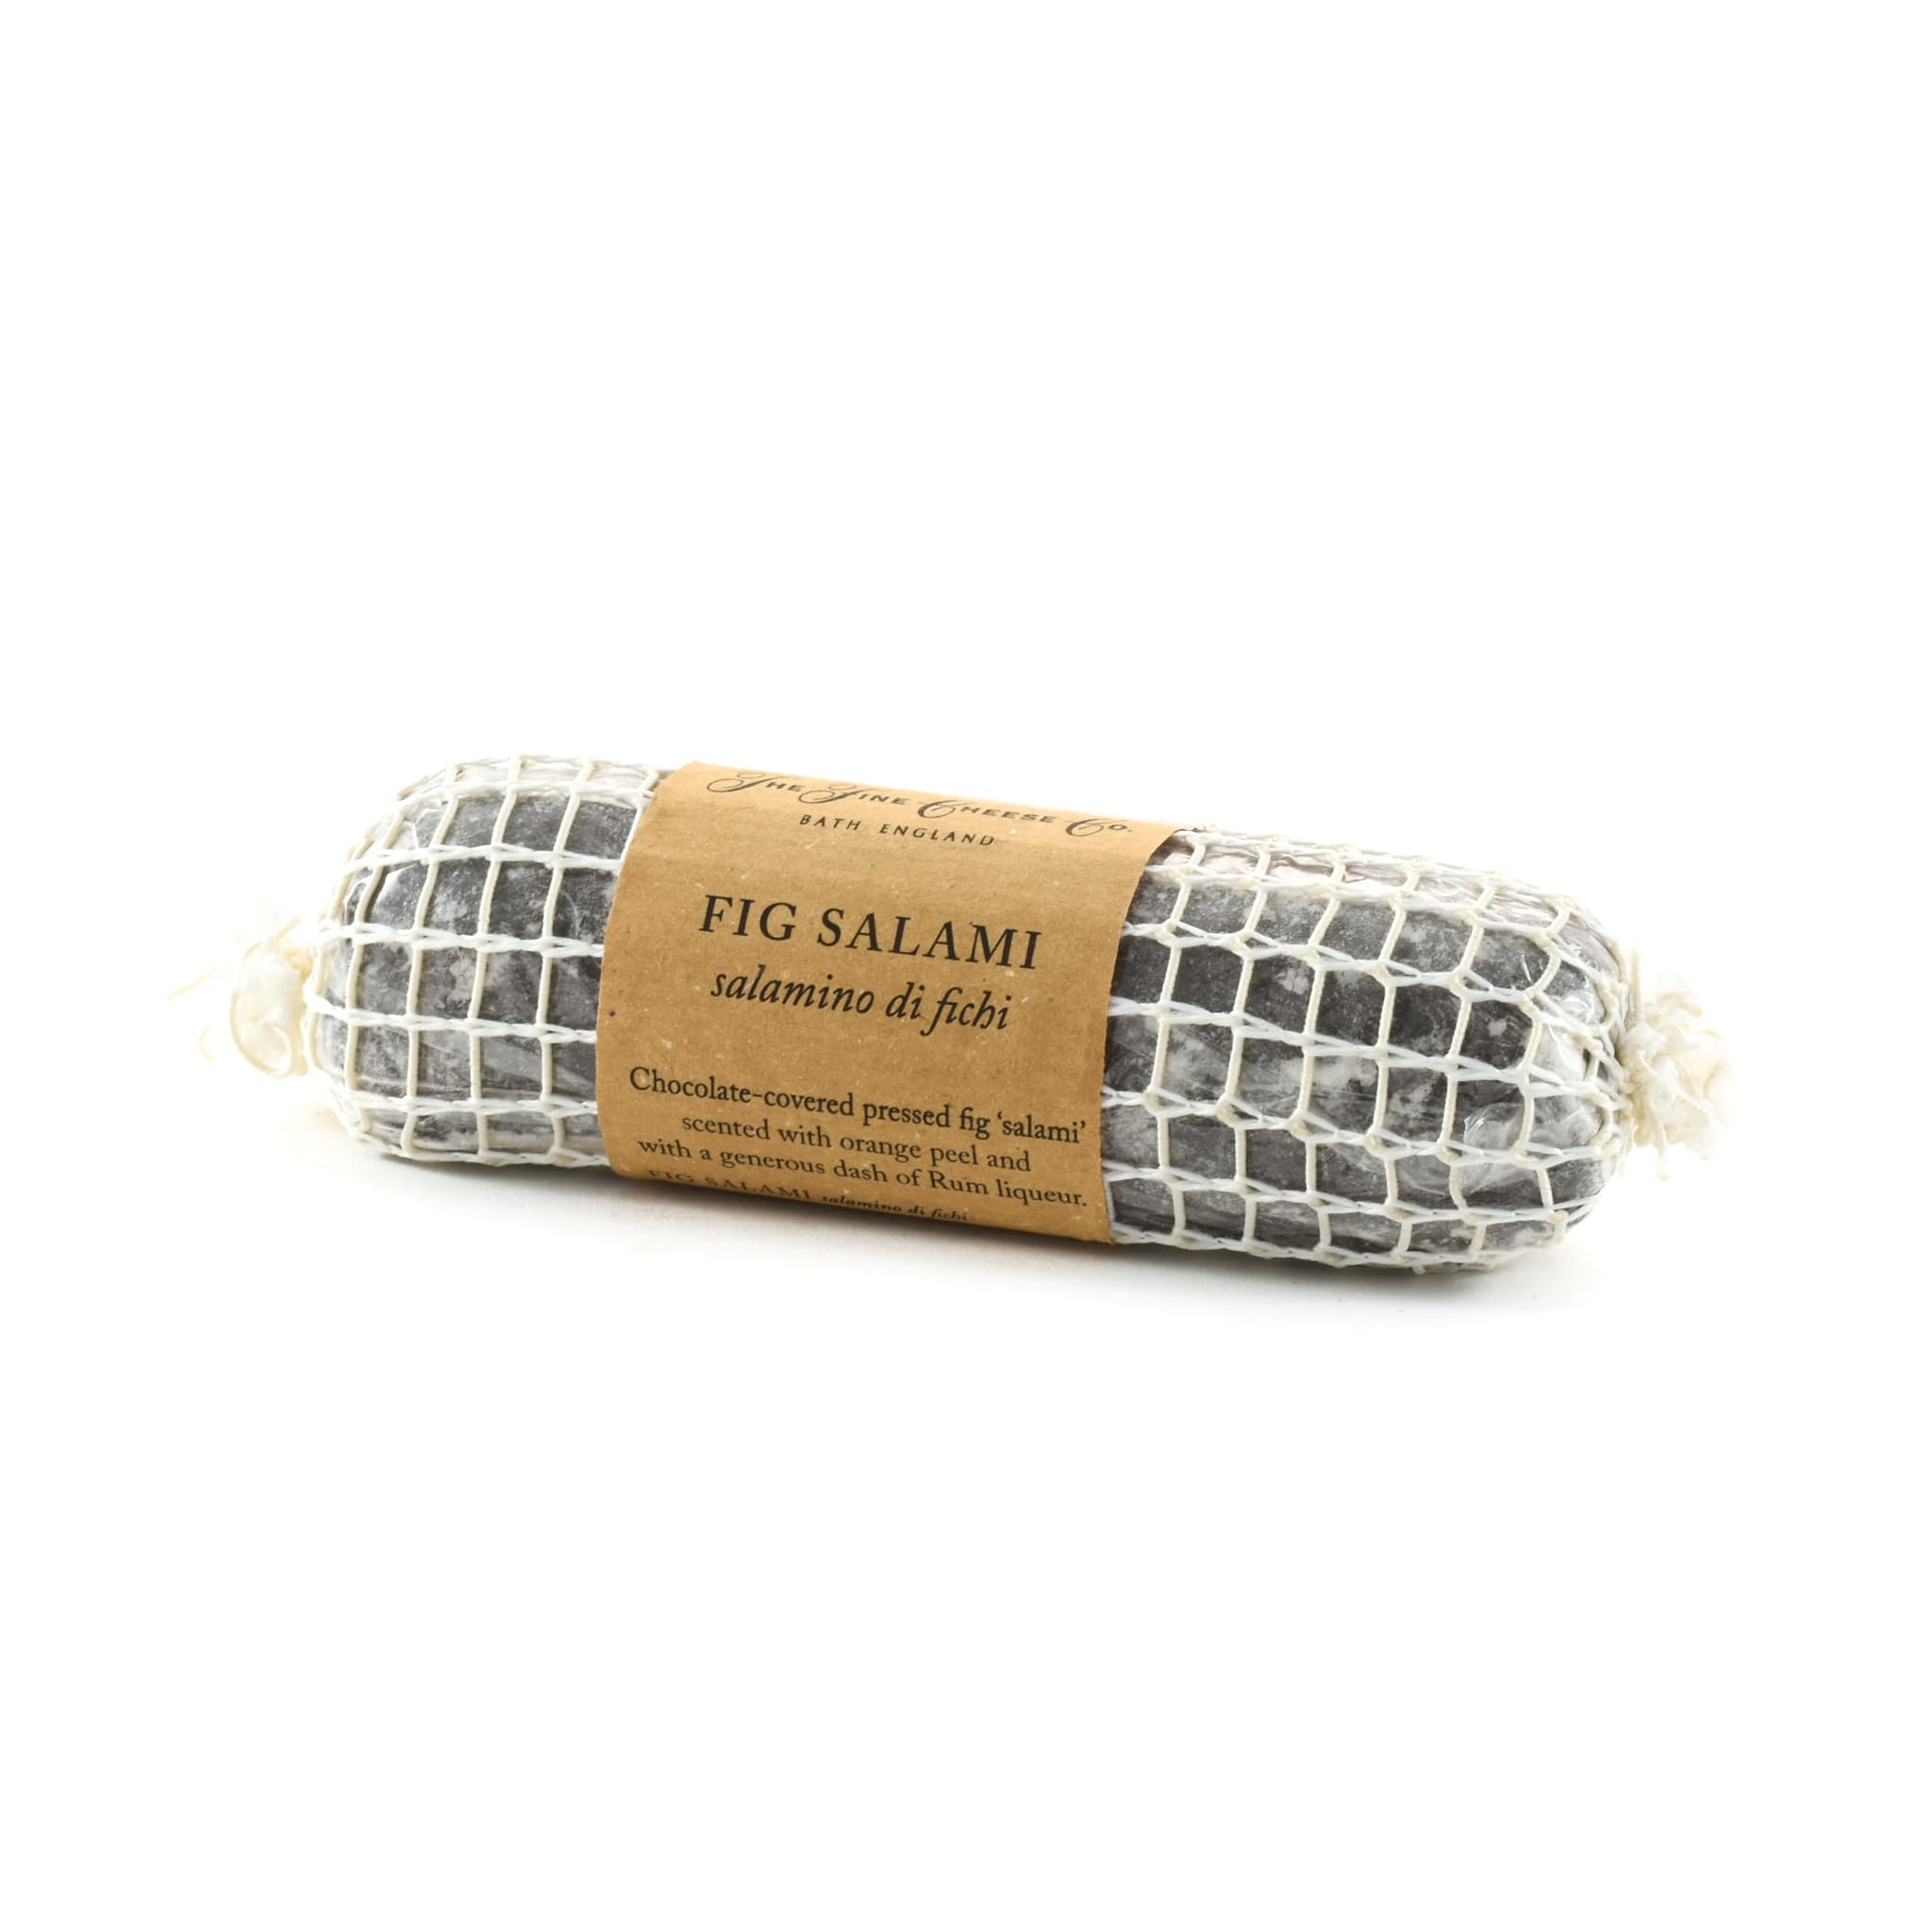 Chocolate Covered Fig "Salami" 200g